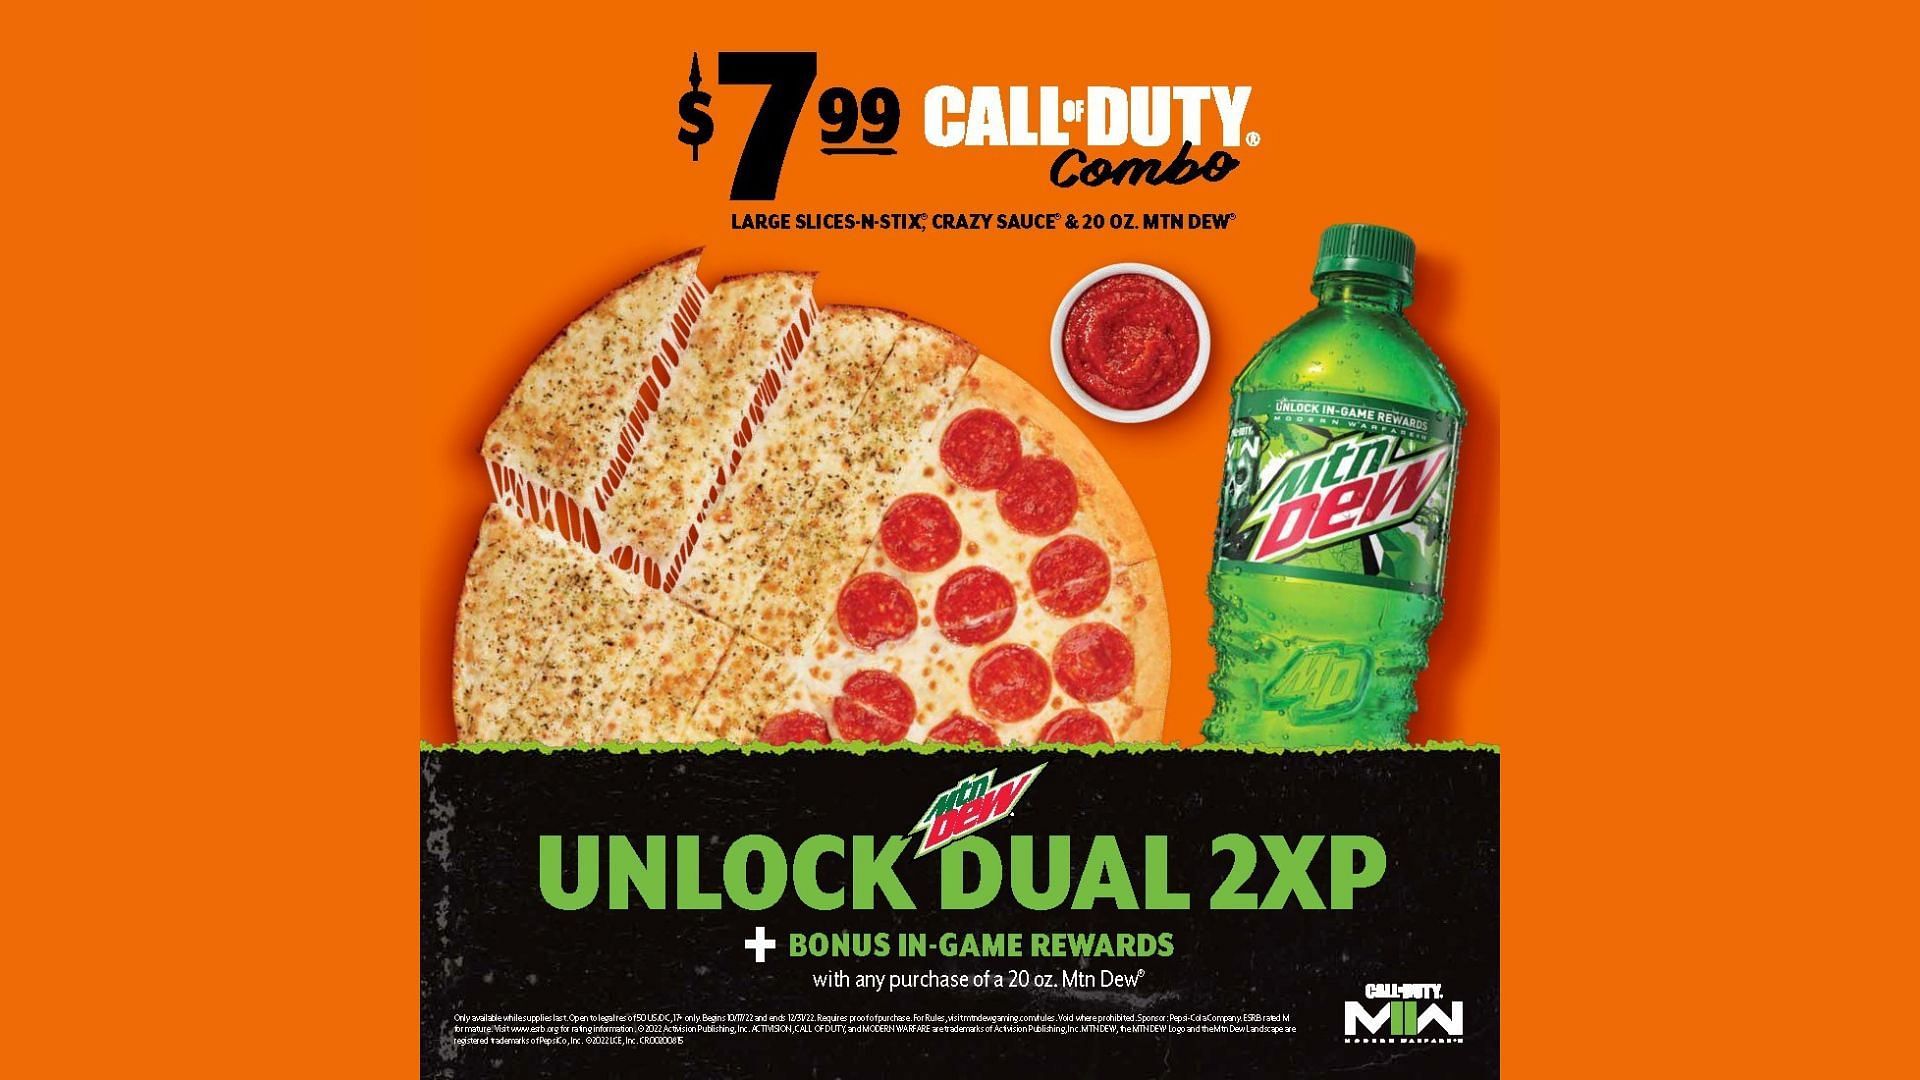 Players can redeem free Double XP codes upon making a purchase at Little Caesars (Image via Twitter/Call of Duty)